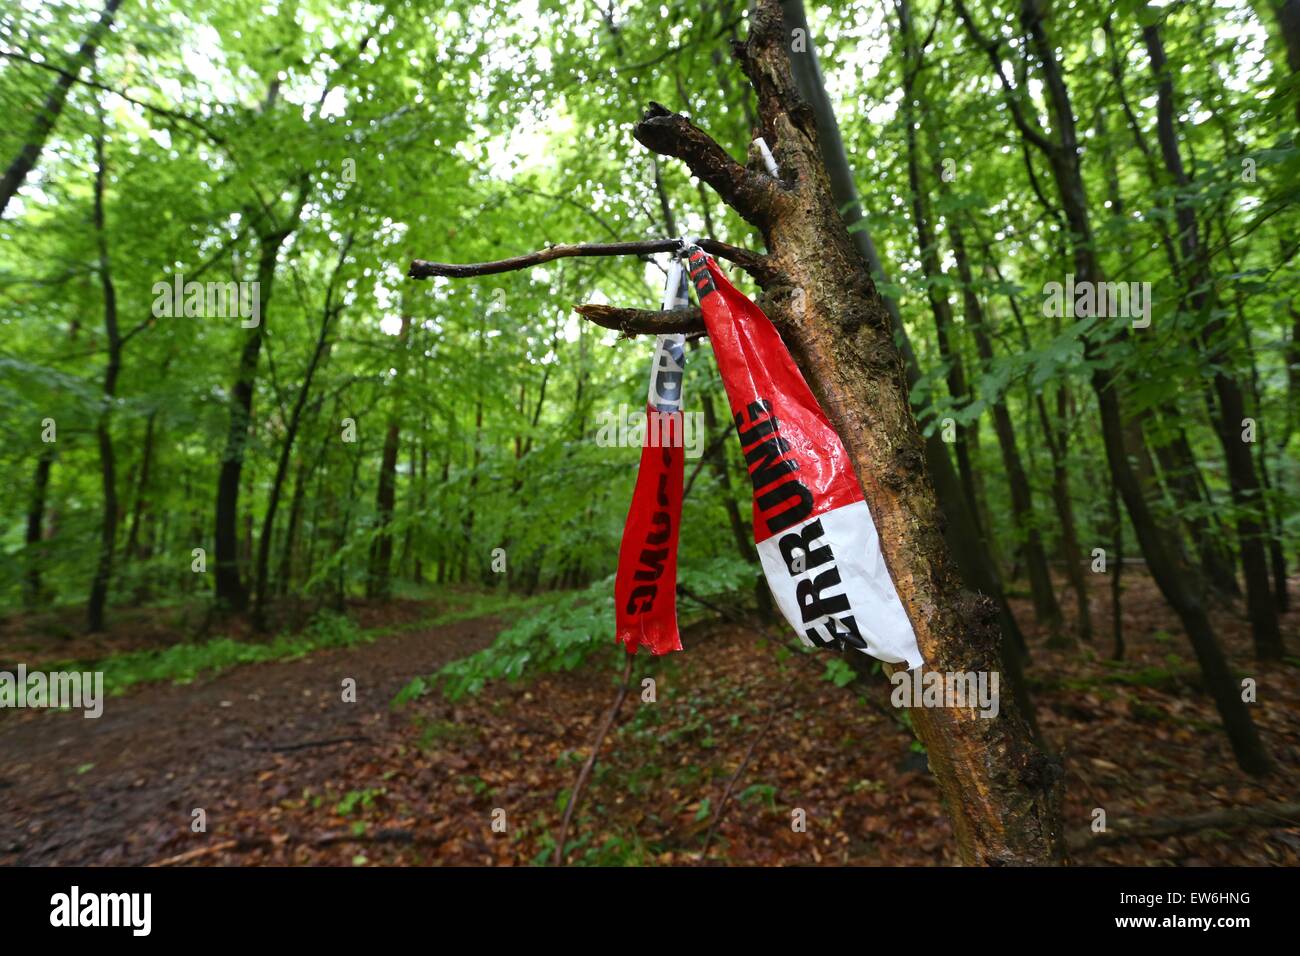 Kist, Germany. 18th June, 2015. The remnants of police tapes are pictured in a forest near Kist, Germany, 18 June 2015. The 50-year-old son of entrepreneur Reinhold Wuerth was found in this part of the forest after being abducted. © dpa picture alliance/A Stock Photo